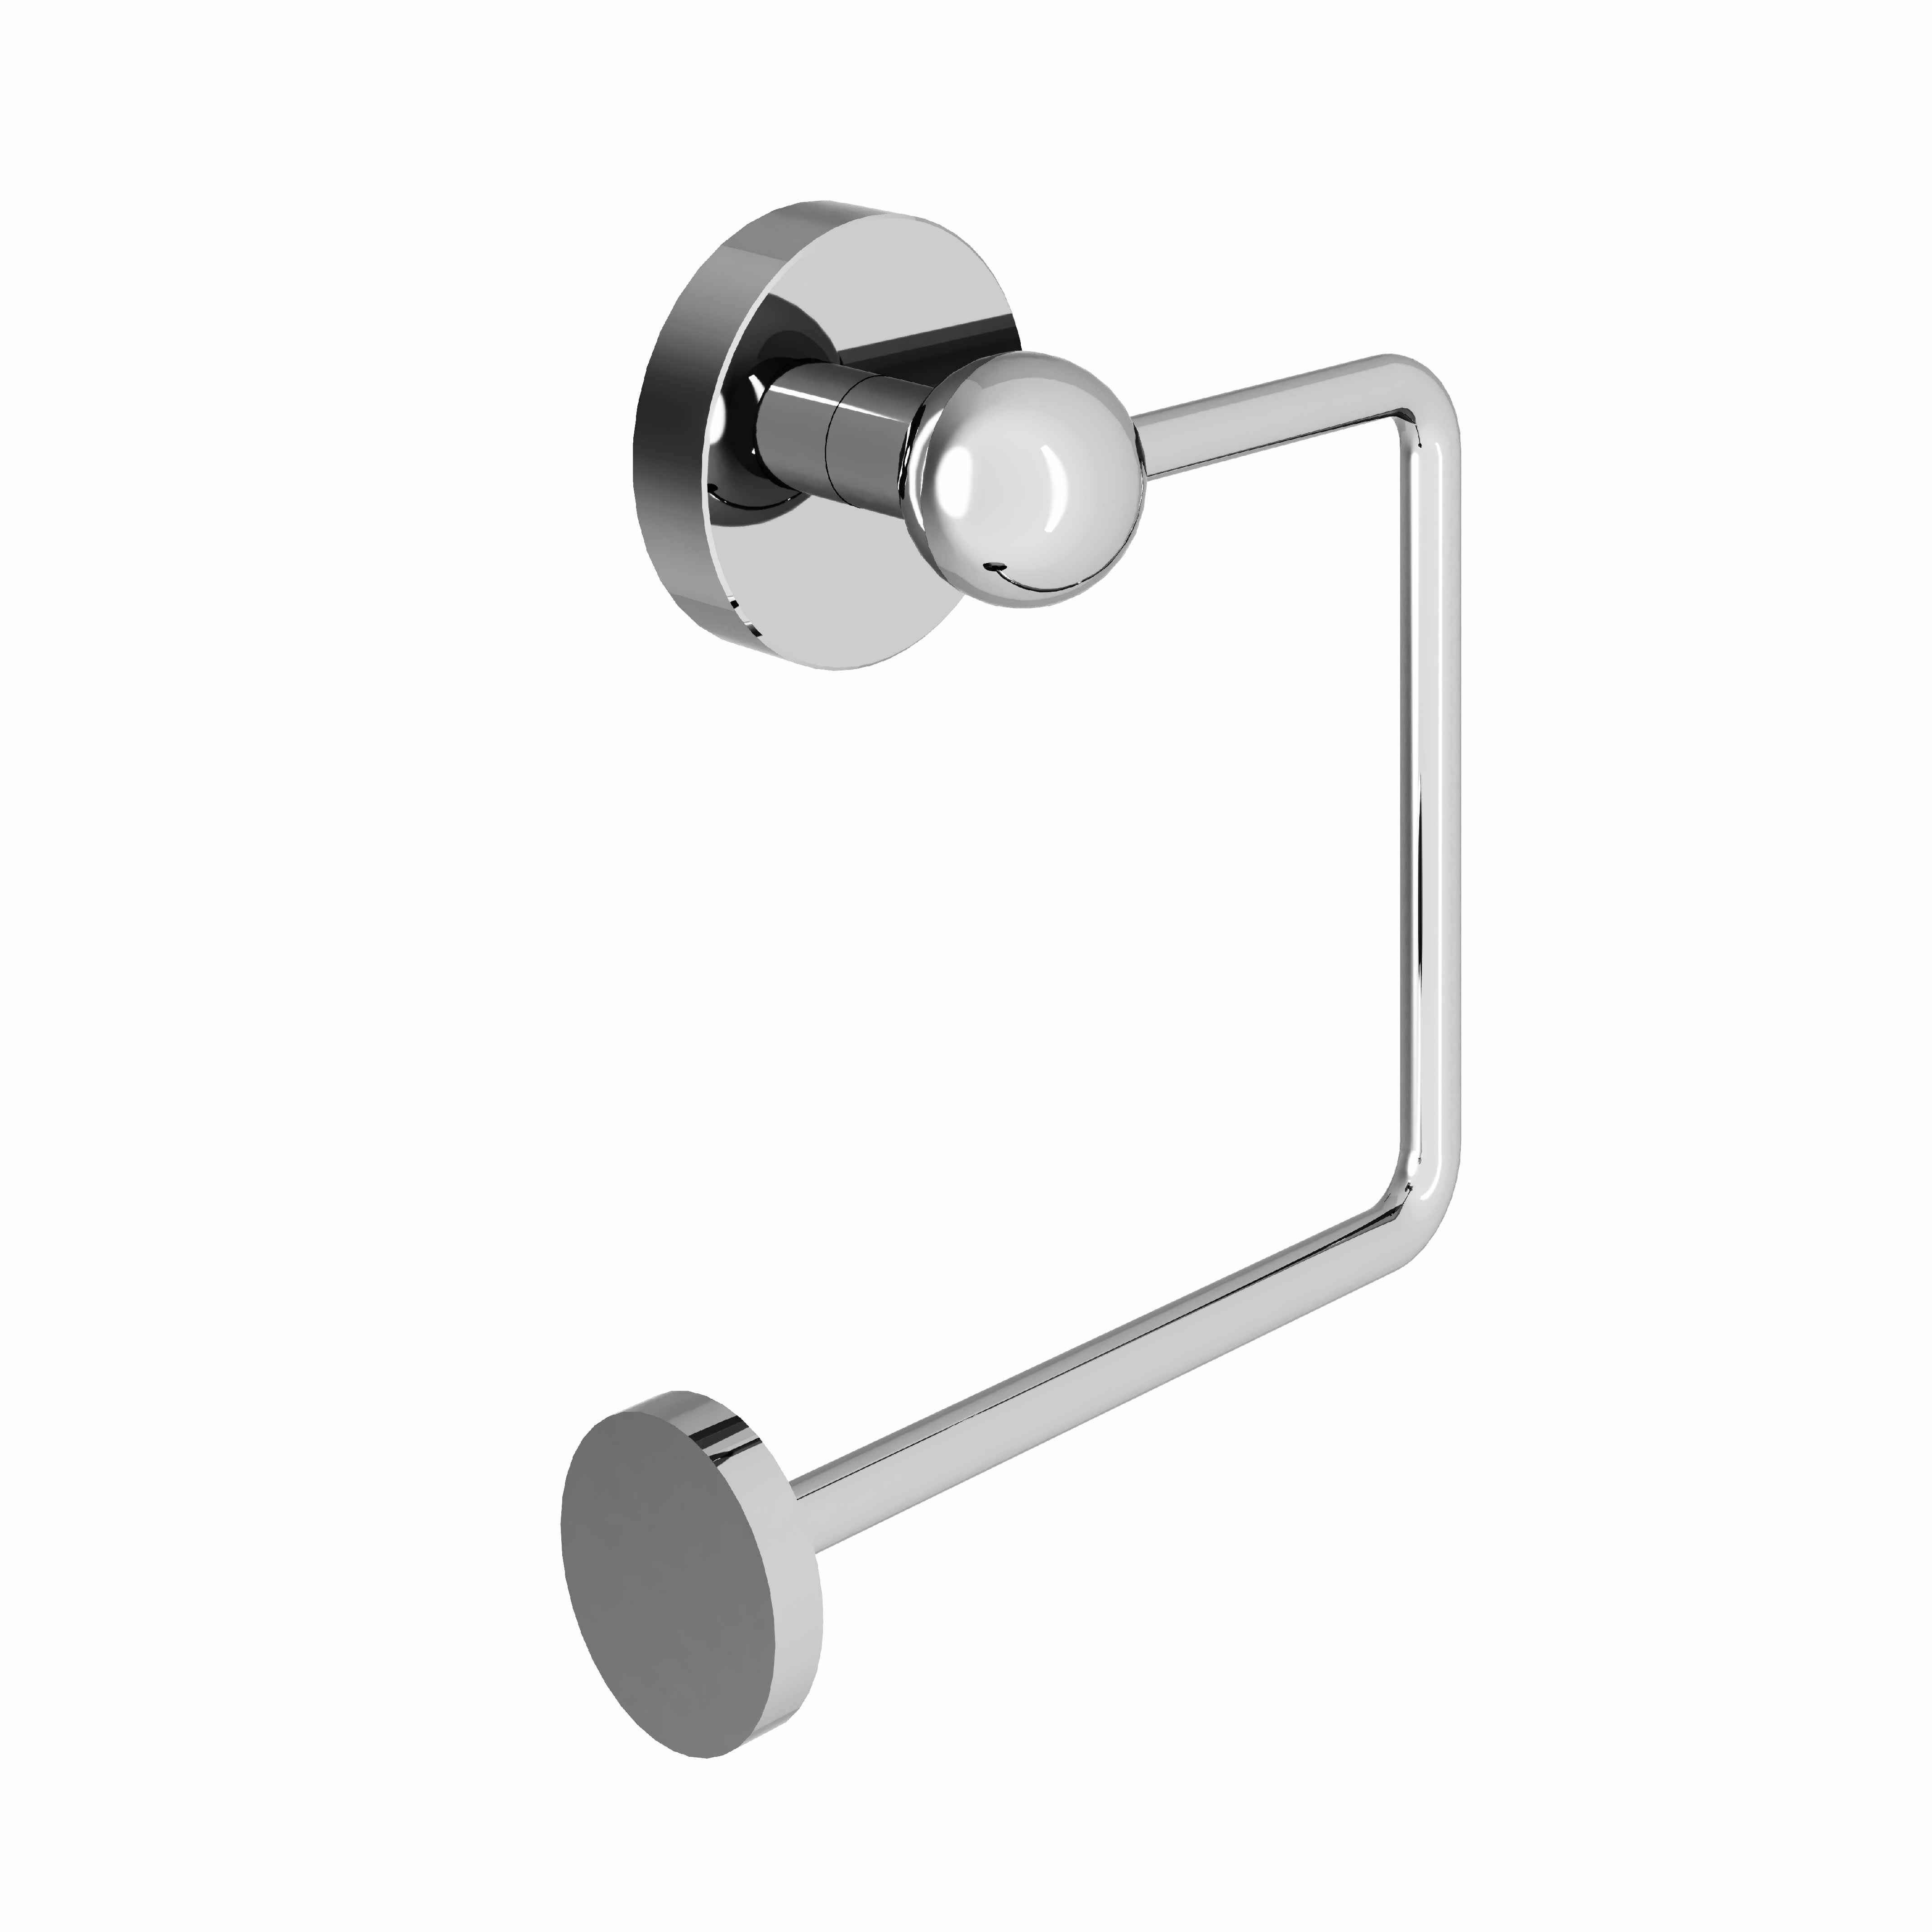 M90-504 Toilet roll holder without cover